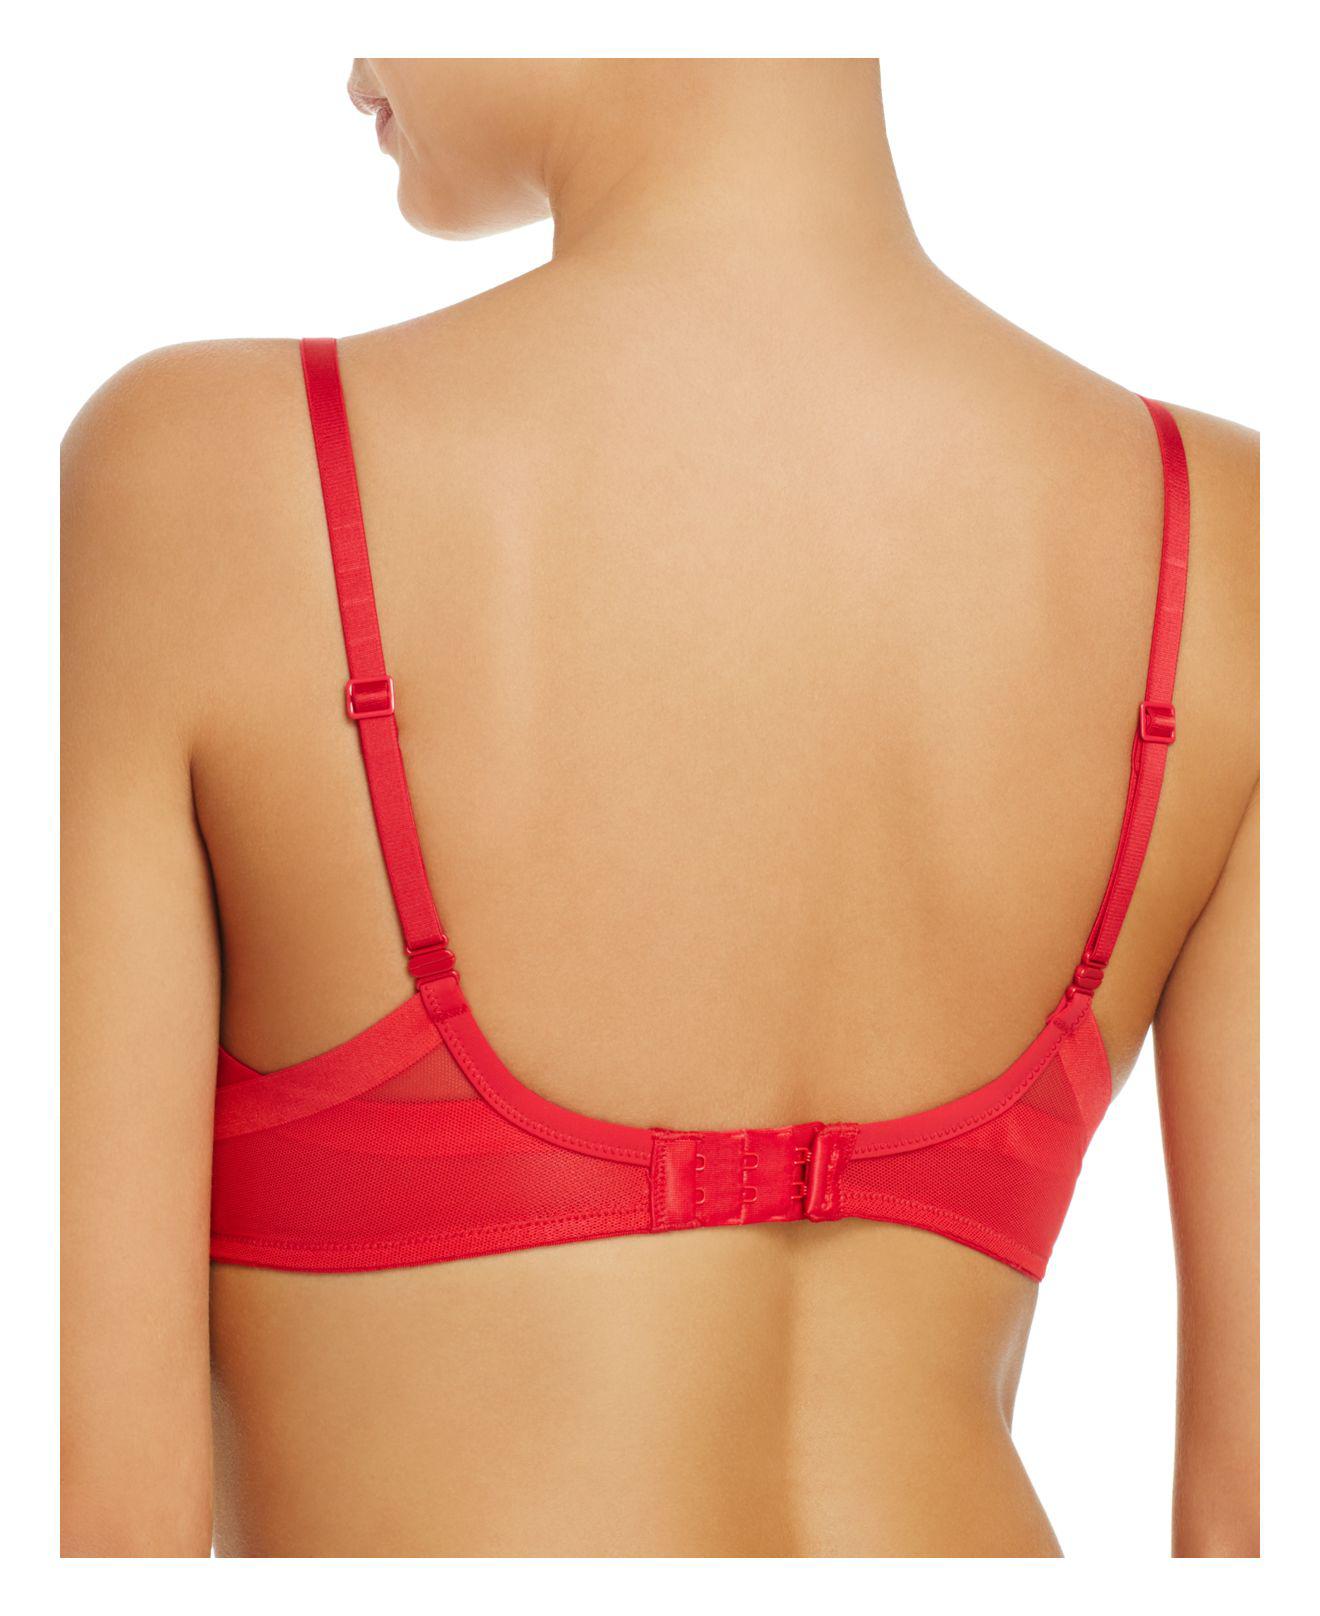 CALVIN KLEIN 205W39NYC Sculpted Plunge Push-up Bra in Red - Lyst